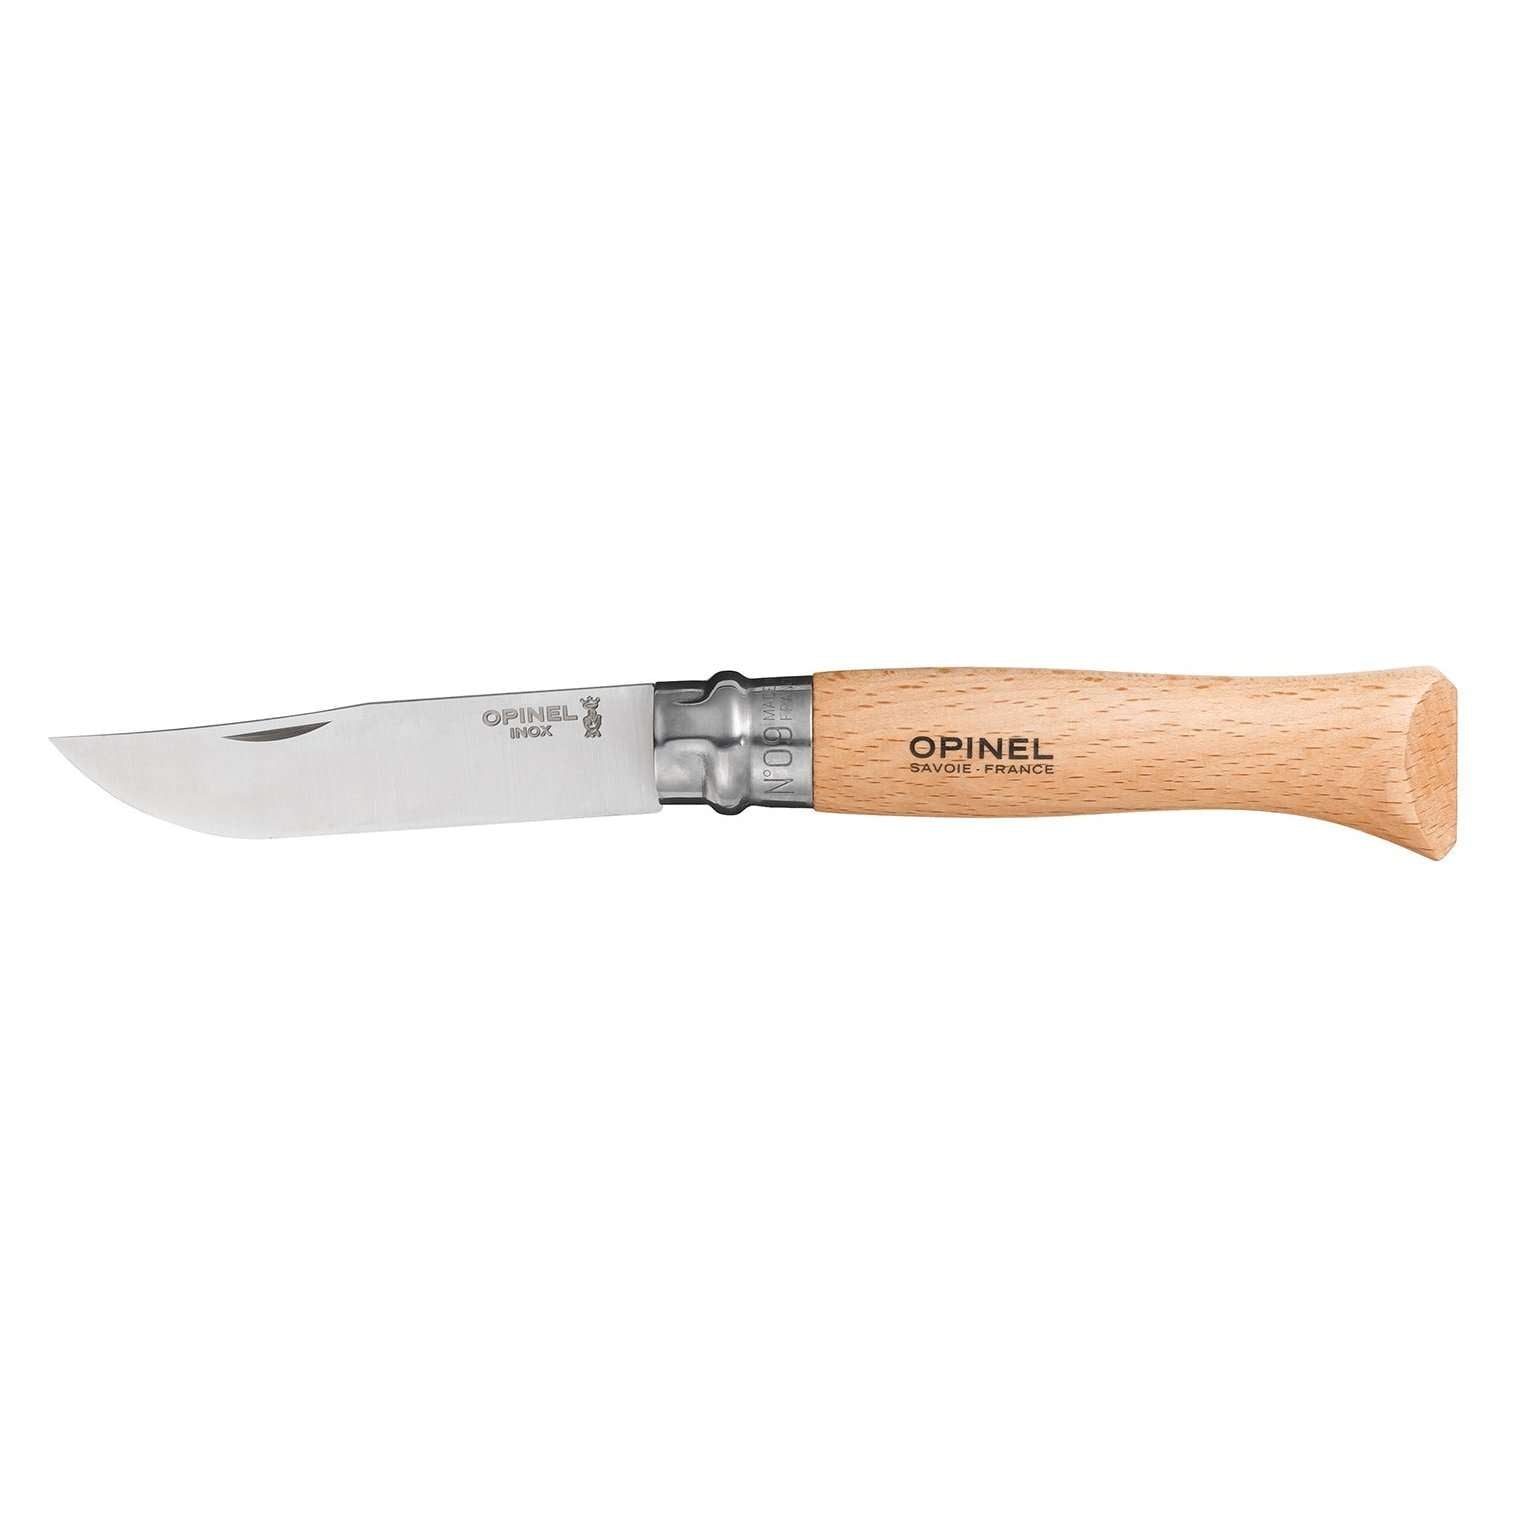 Opinel, Opinel No.9 Classic Originals Stainless Steel Knife, Folding Knives, Wylies Outdoor World,